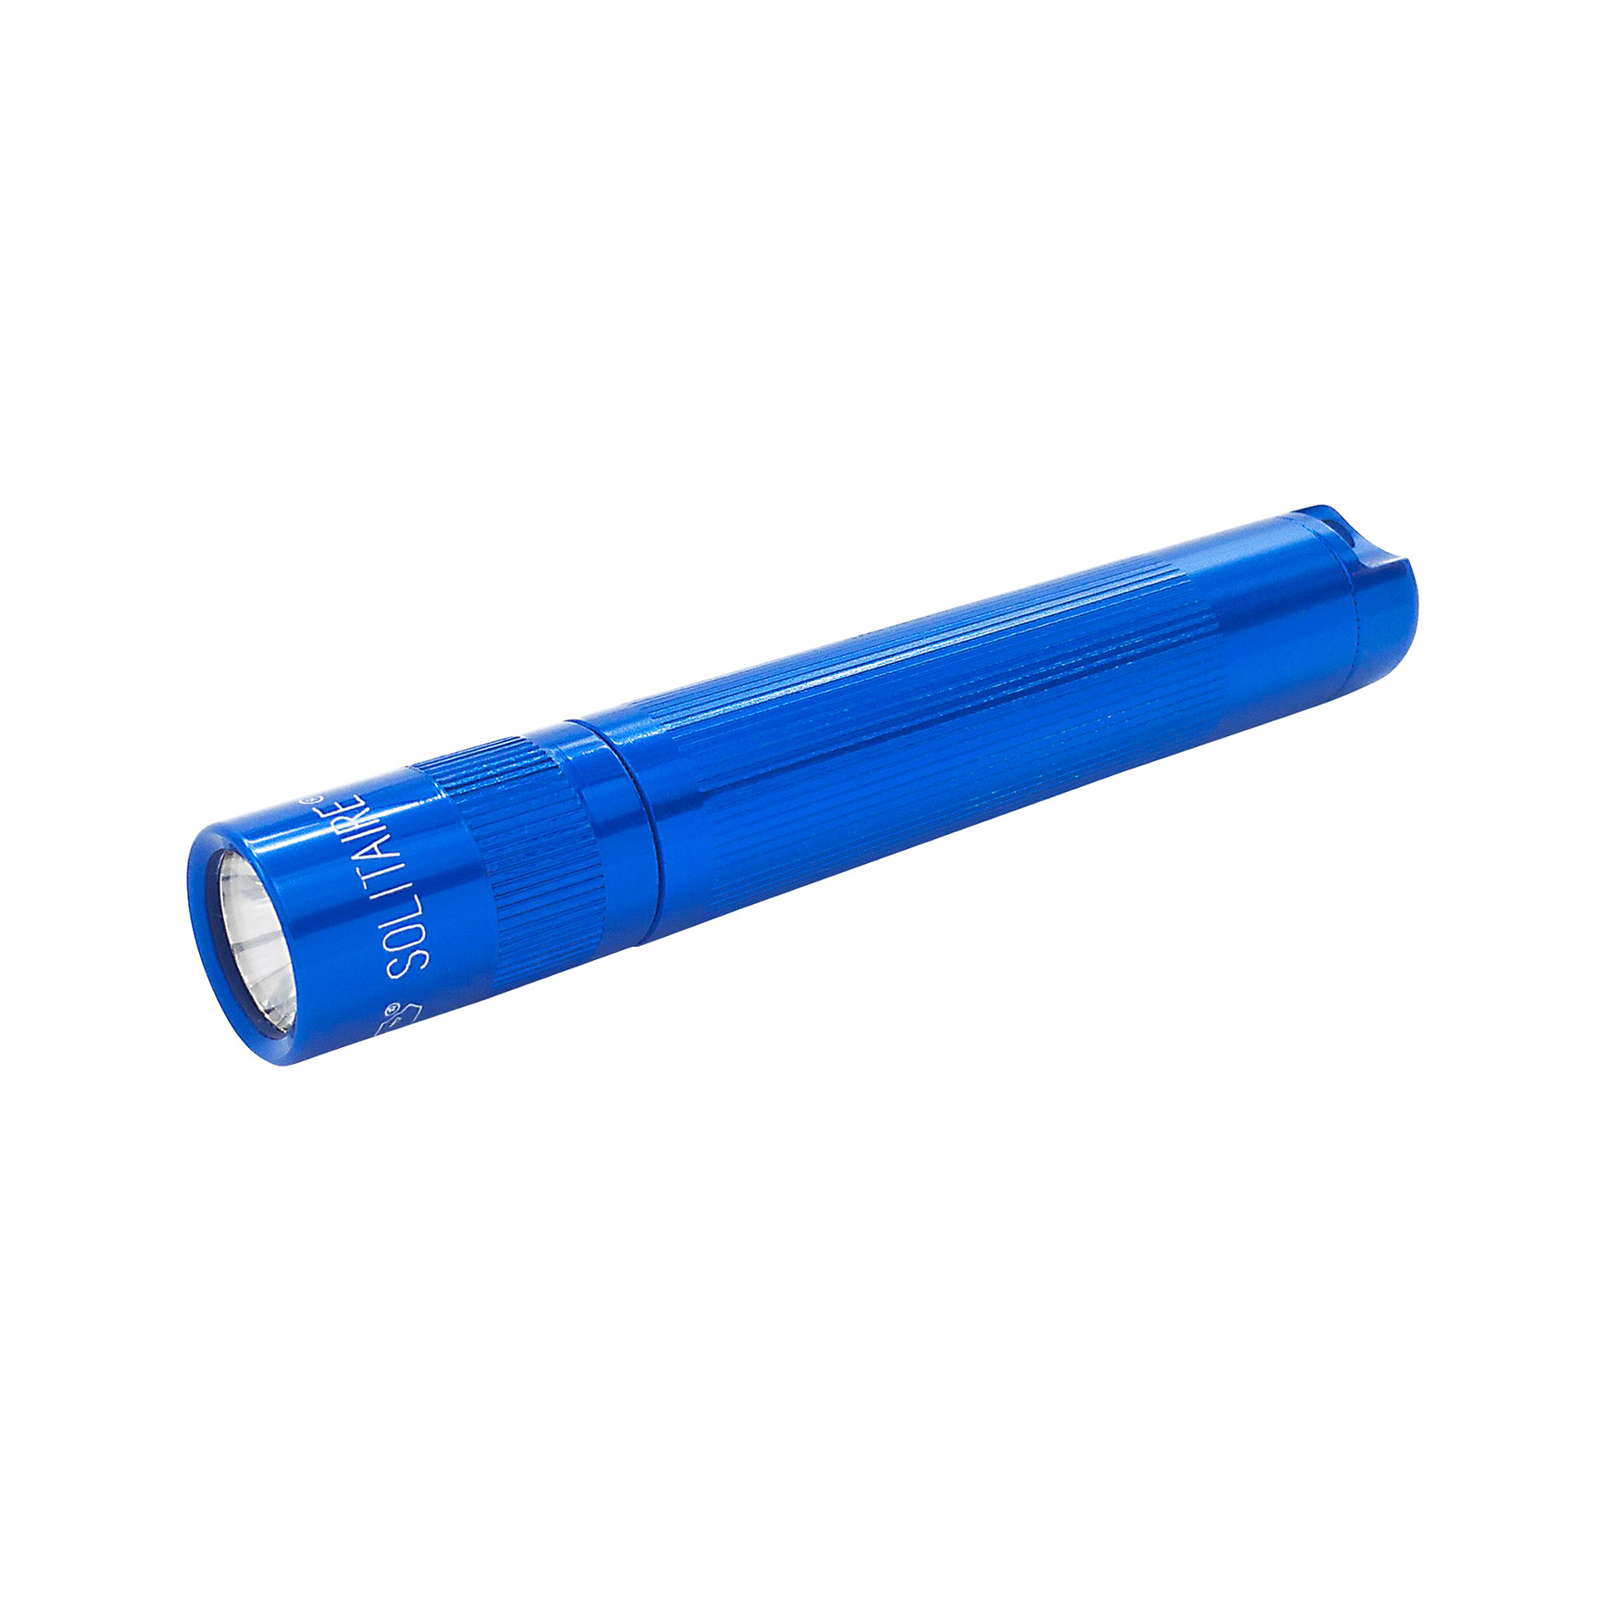 Maglite Xenon lommelygte Solitaire 1-Cell AAA, æske, blå